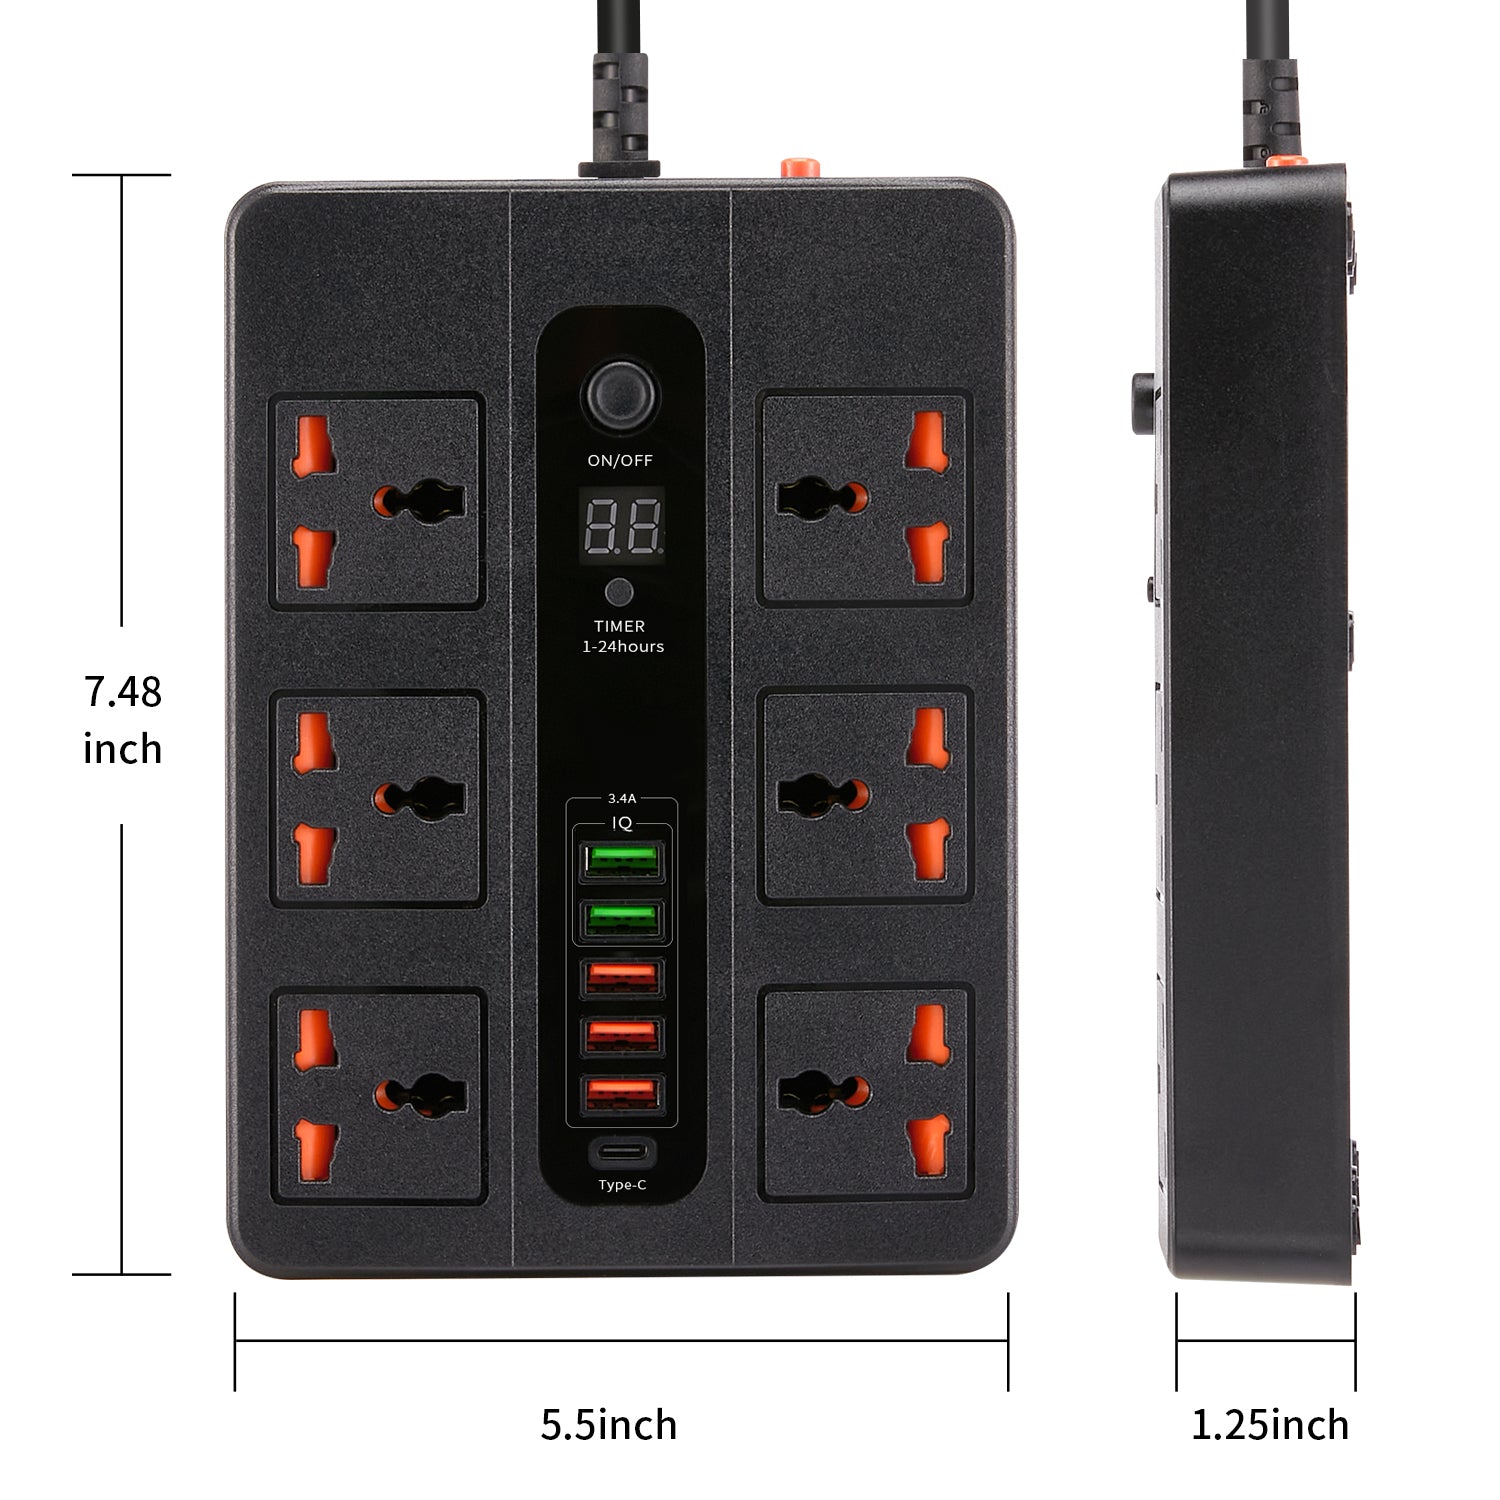 OEM Intelligent 6 Way USB A/USB Type C Charging Ports Power Board Surge Protected USB charger Power Strip